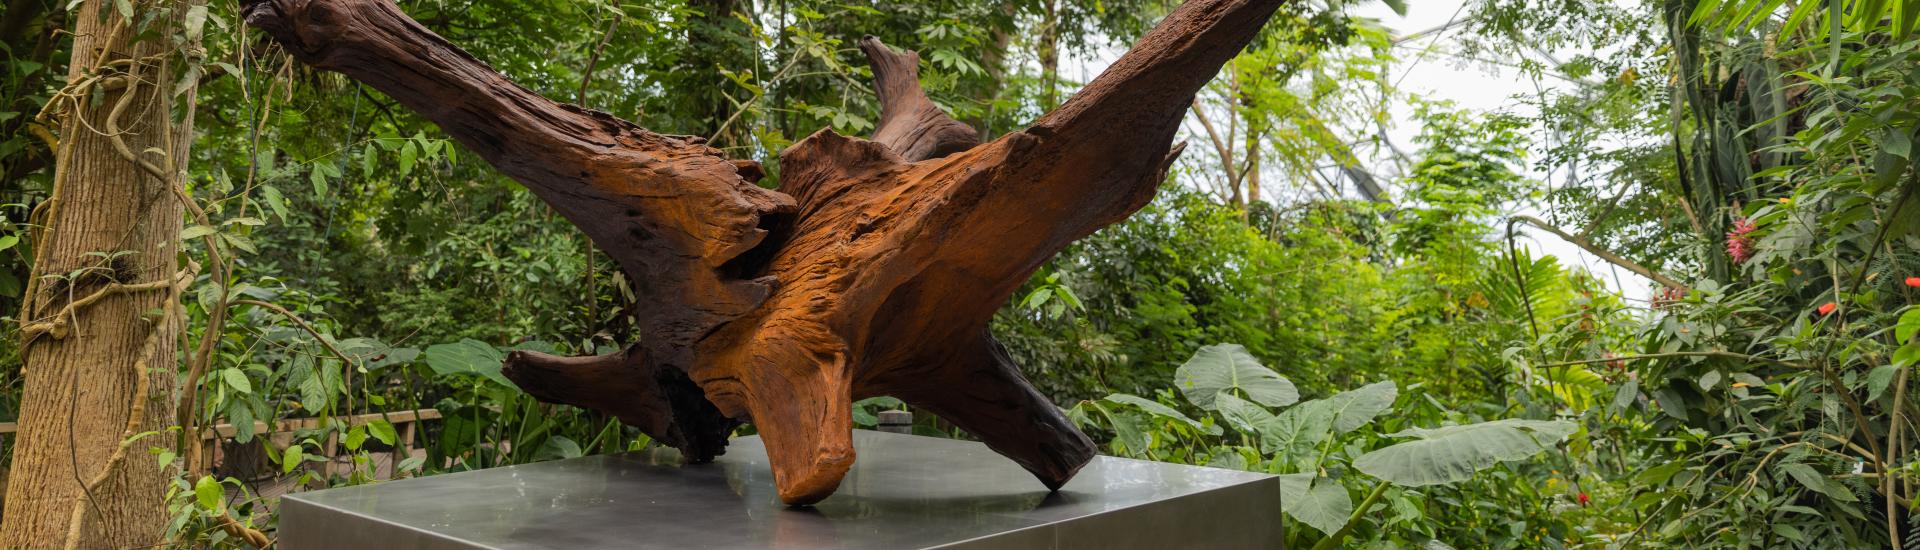 Giant rusting cast iron sculpture of a root in the Rainforest Biome at the Eden Project